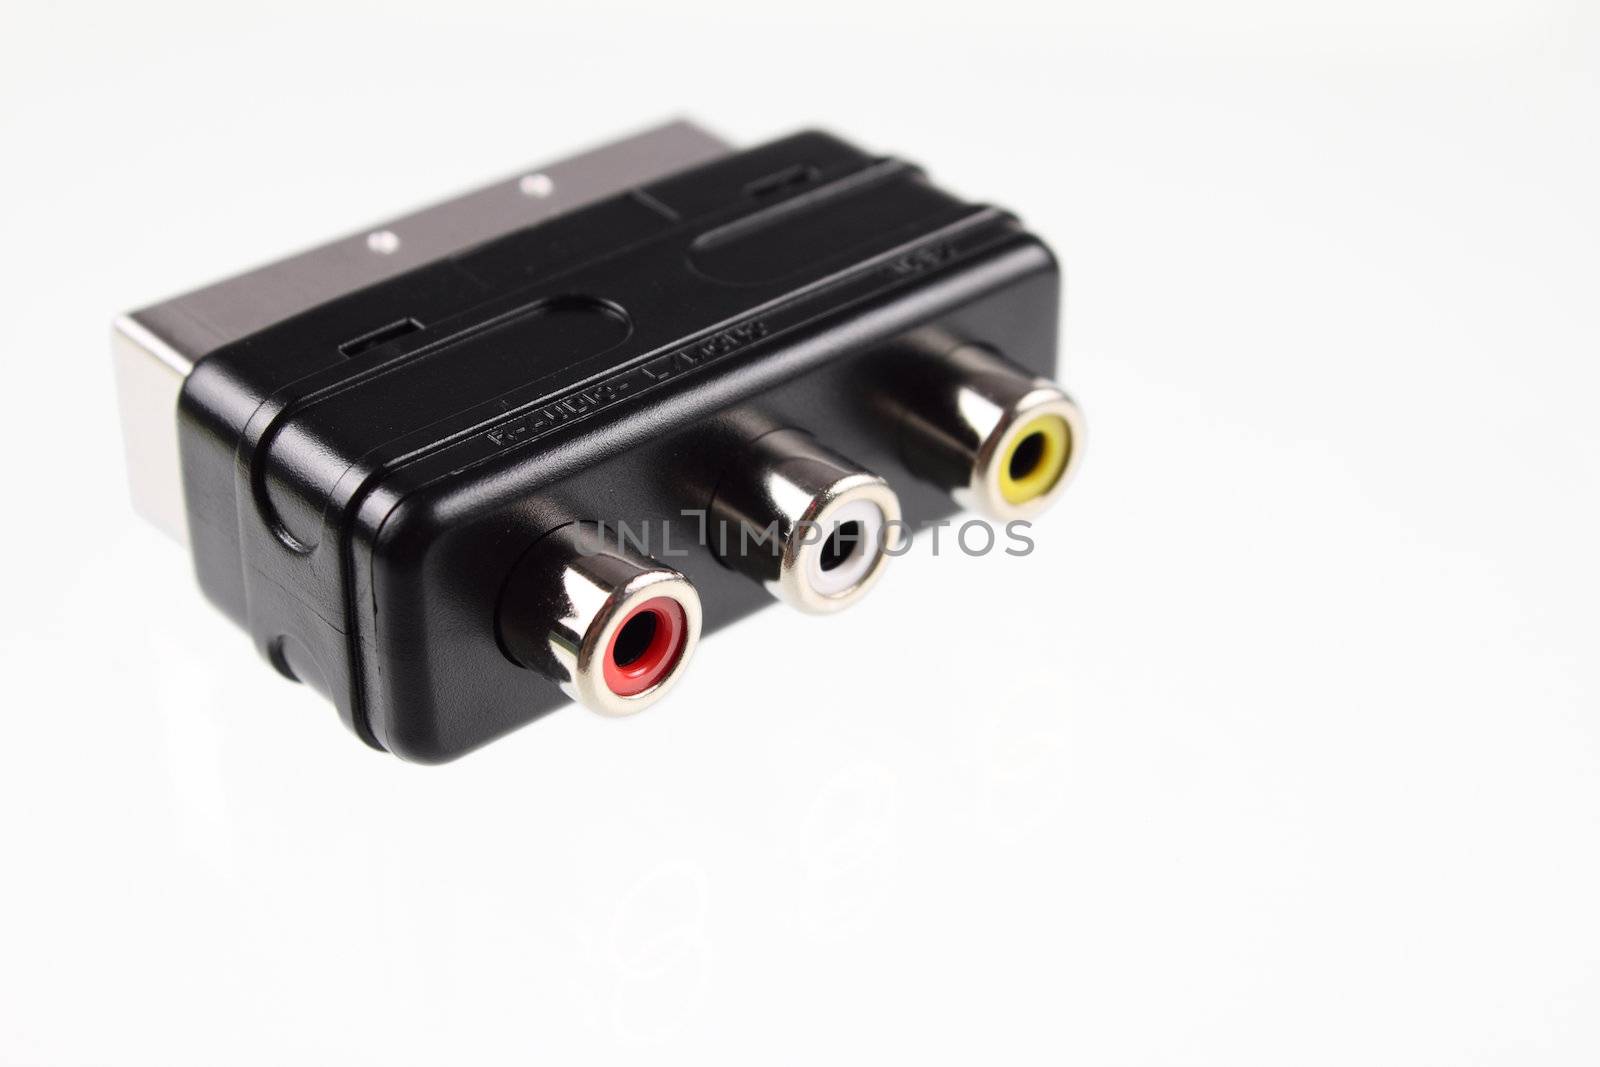 SCART connectors by Incarnatus